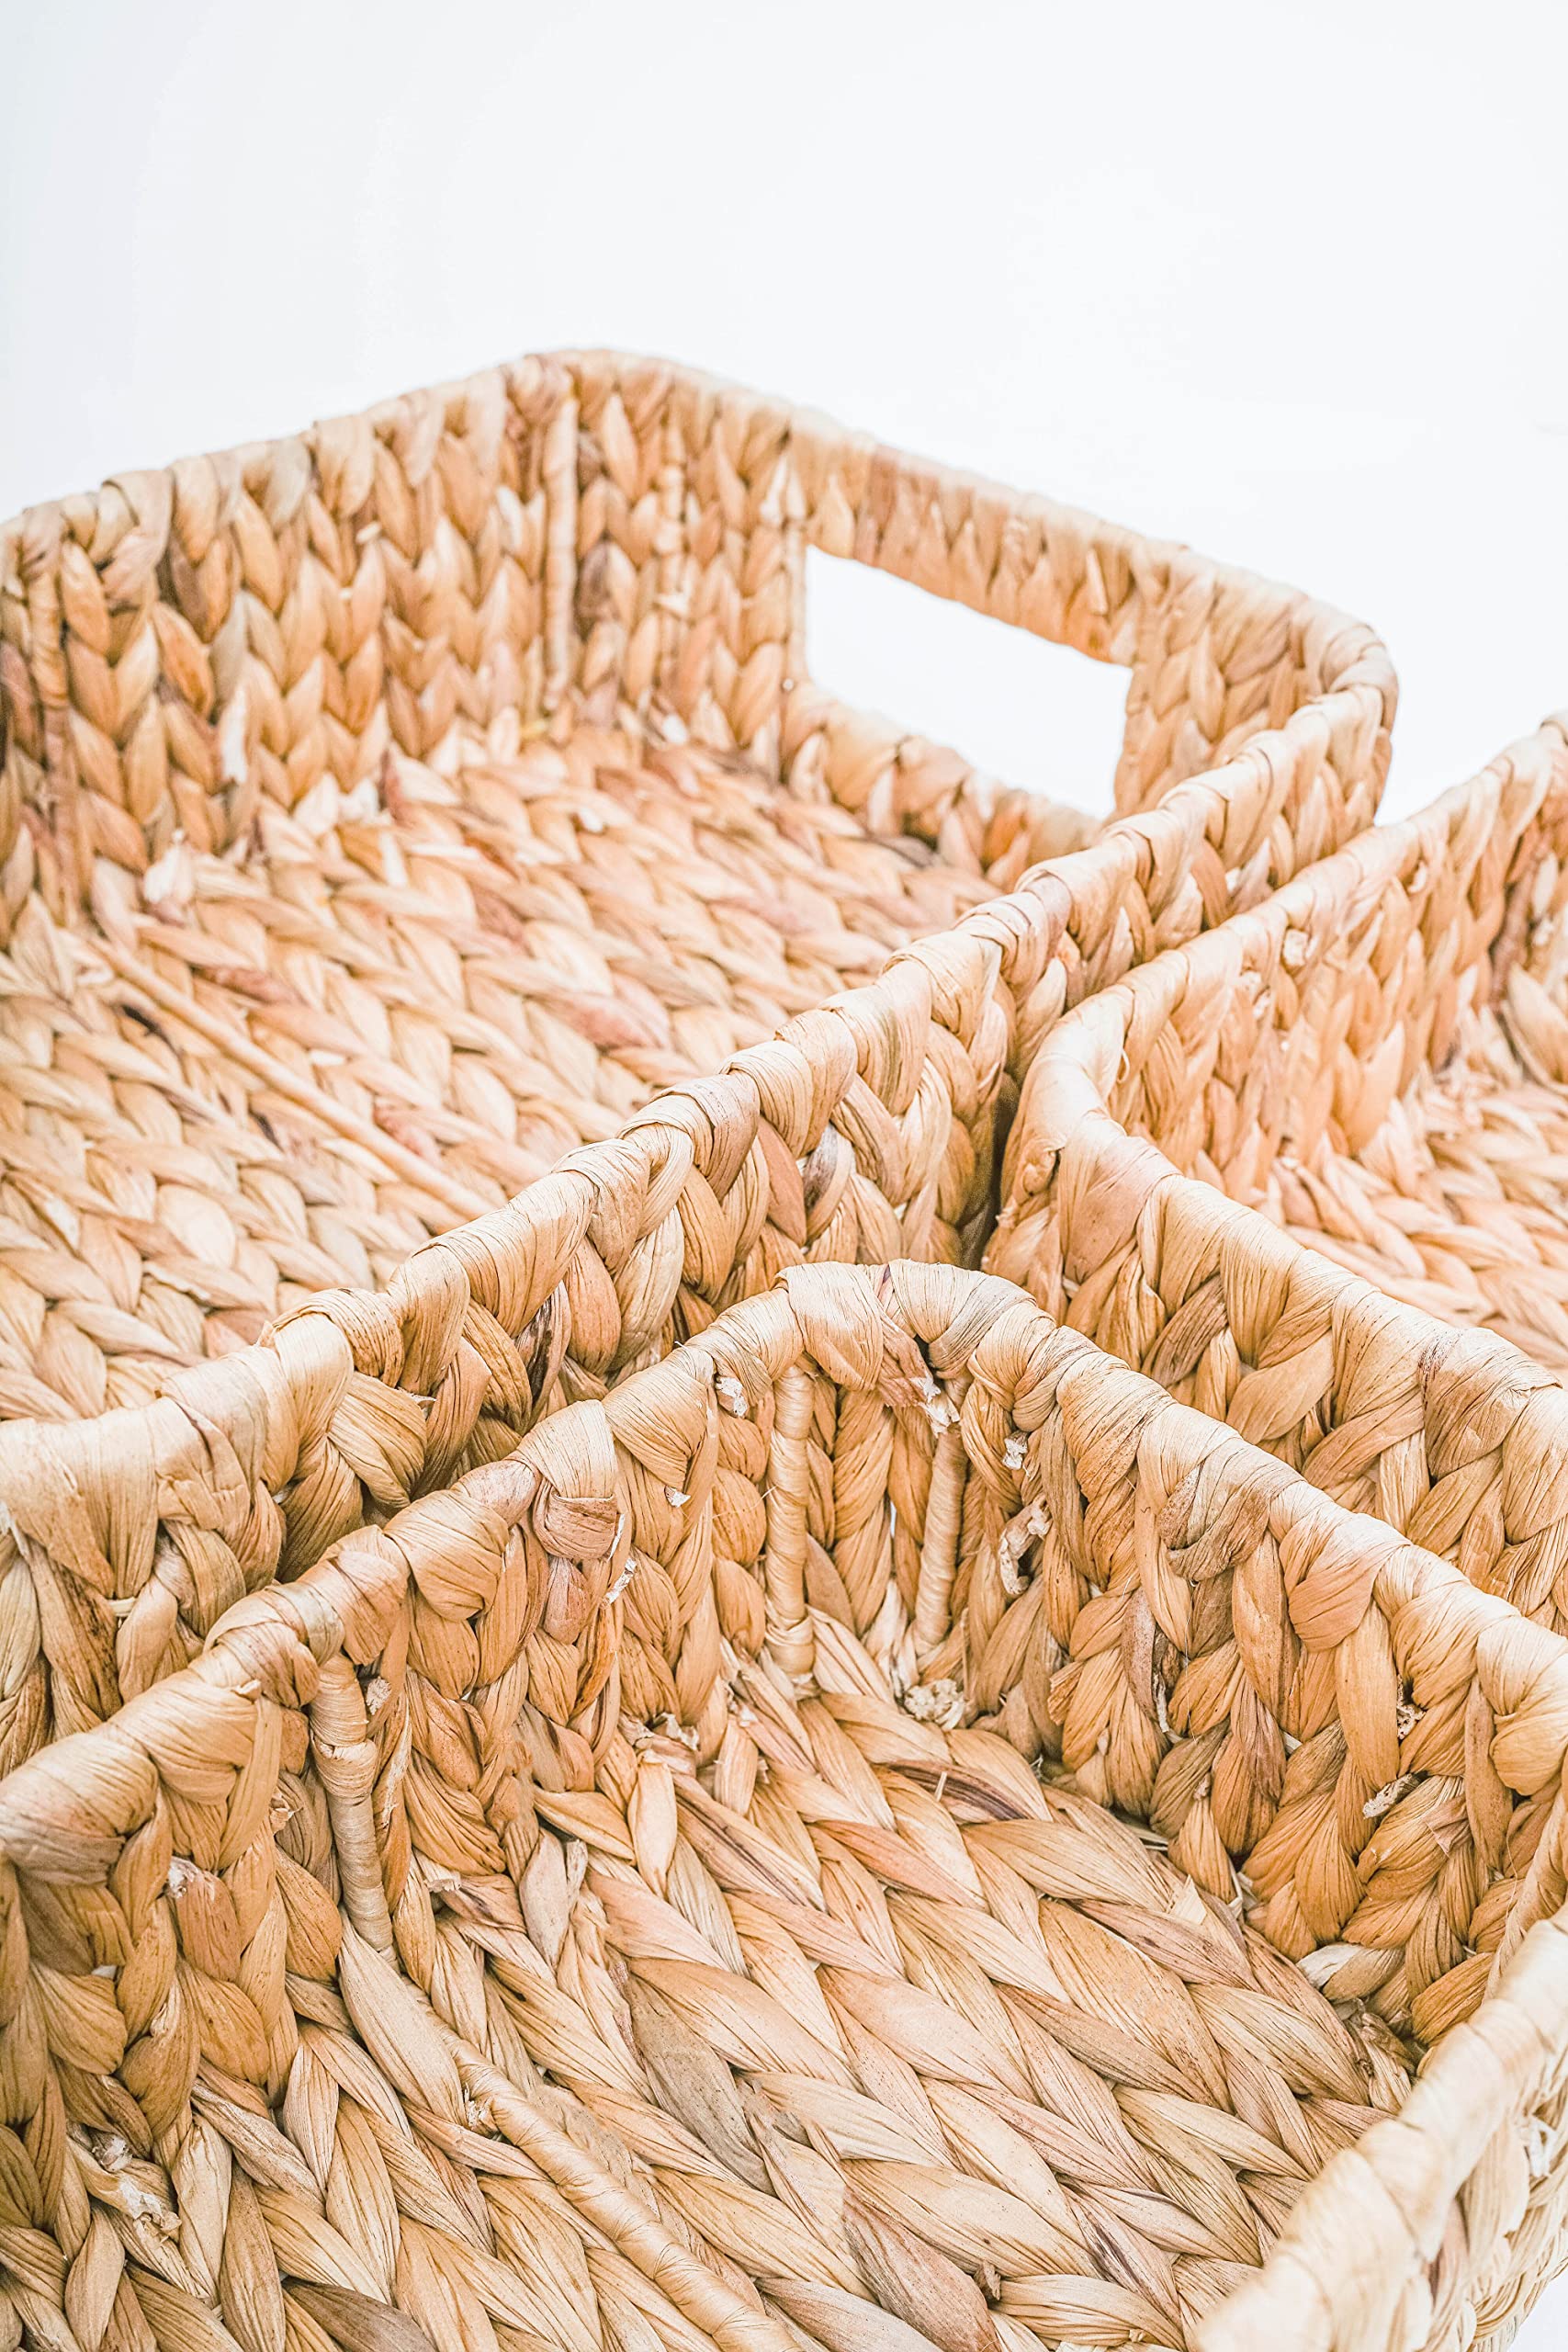 LiLaCraft Set 3 Natural Storage Baskets for Organizing, Wicker Cubby Storage Bins, Water Hyacinth Storage Baskets, Rope Woven Baskets for Storage with Carrying Handles Decor (Set of 3 (1L,2S))…